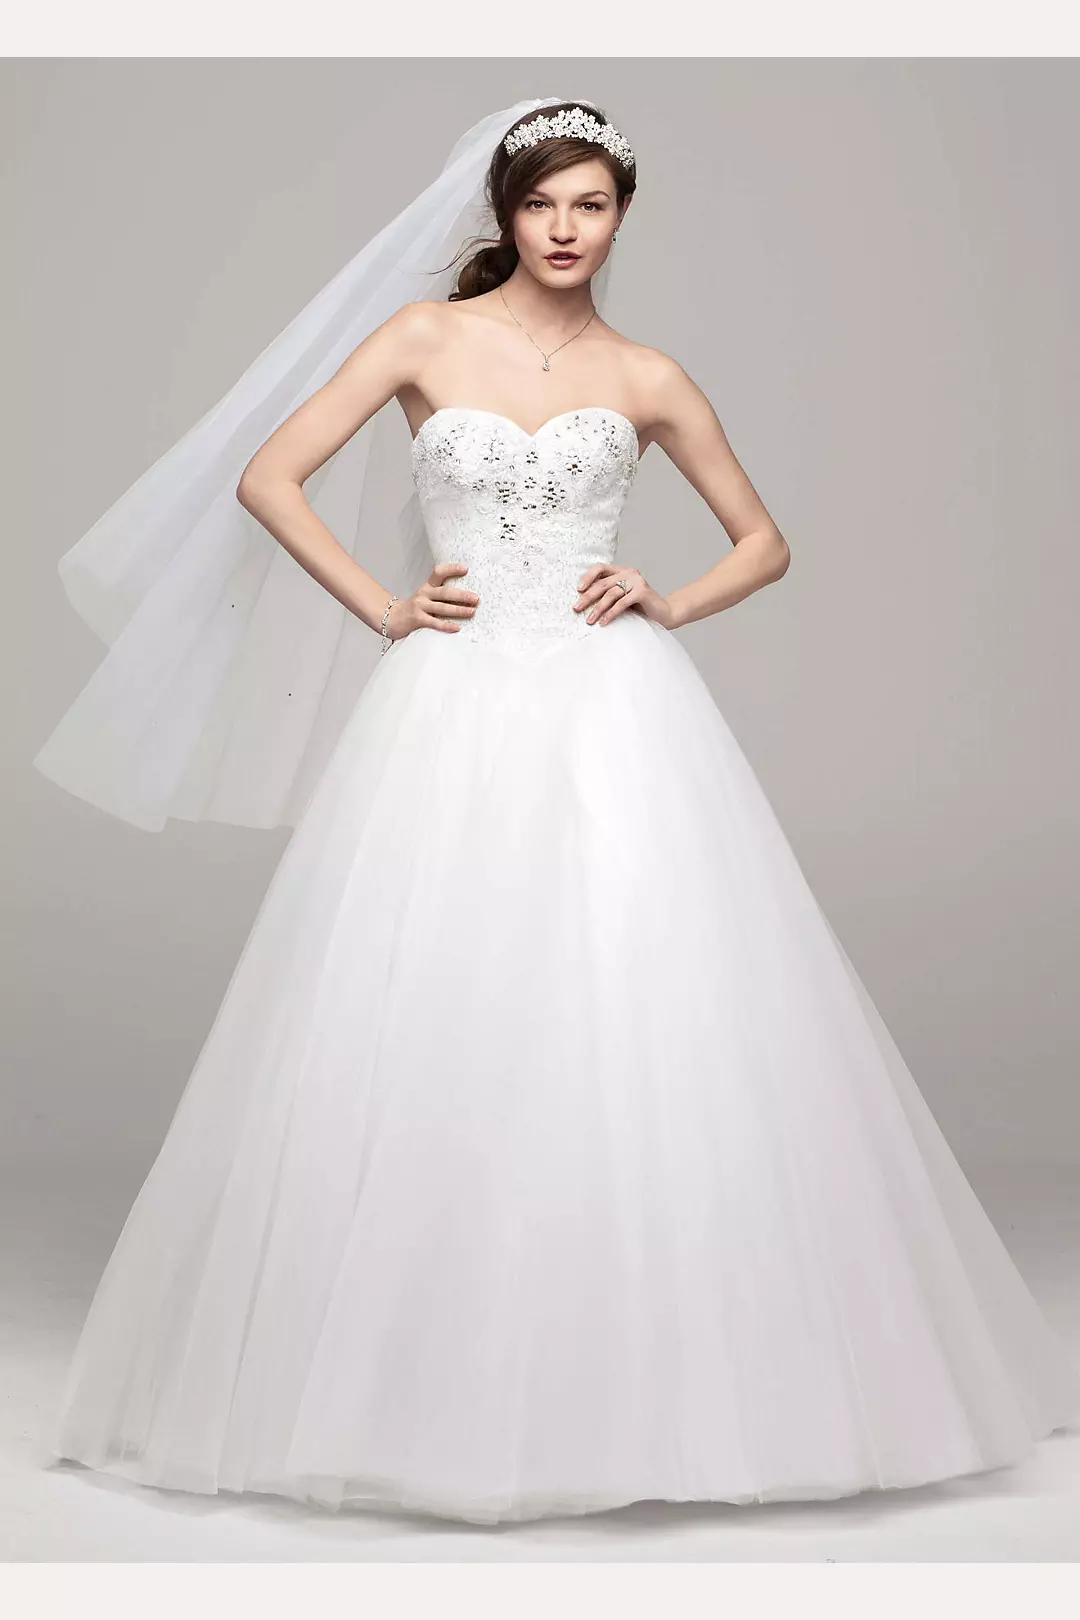 Strapless Tulle Wedding Dress with Beaded Bodice  Image